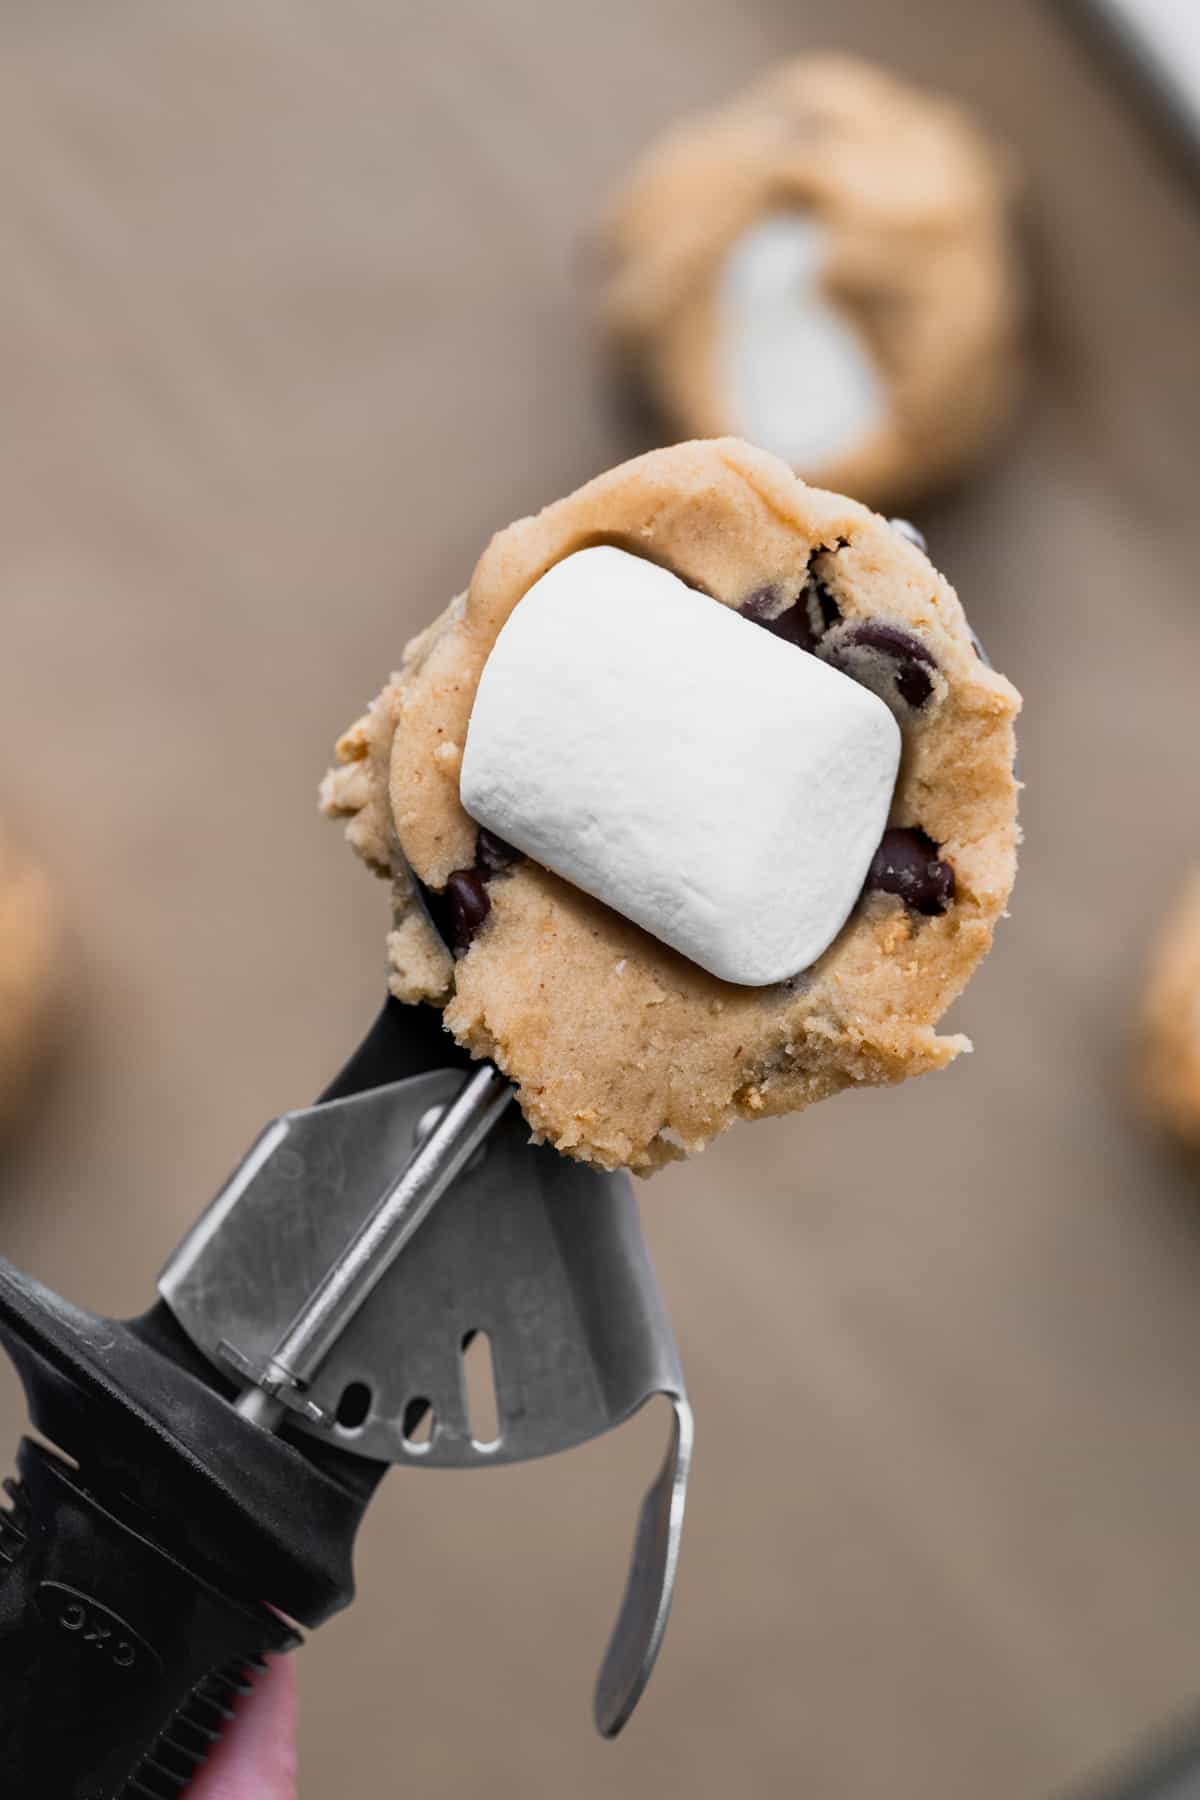 Marshmallow on top of cookie dough scoop.